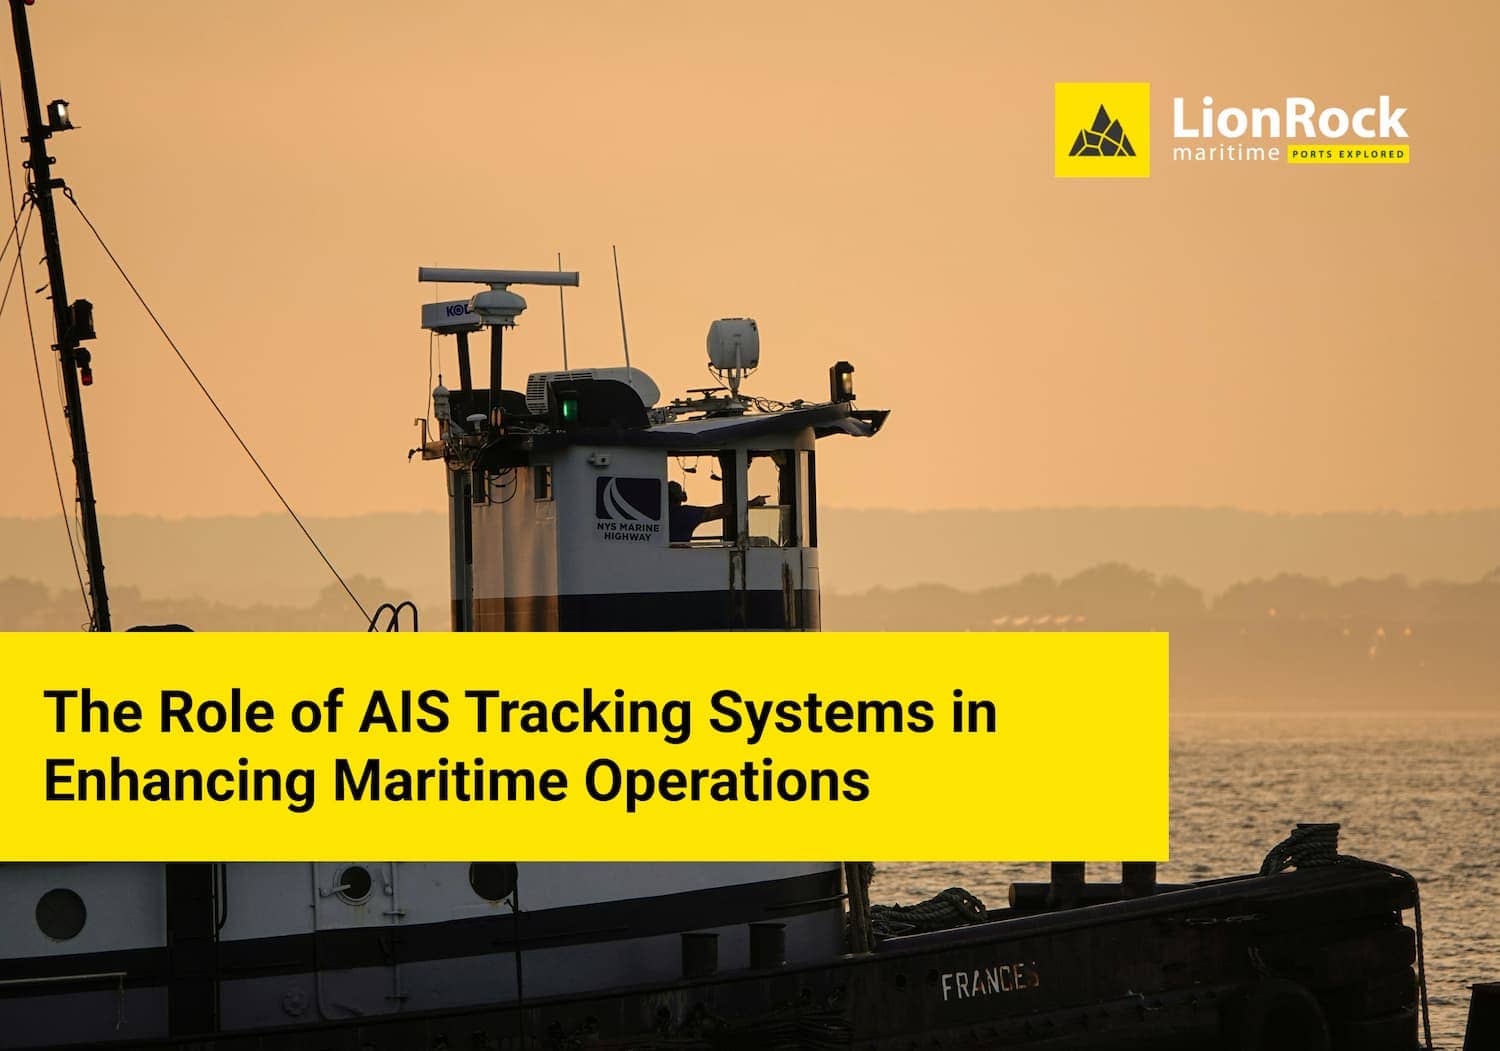 The Role of AIS Tracking Systems in Enhancing Maritime Operations